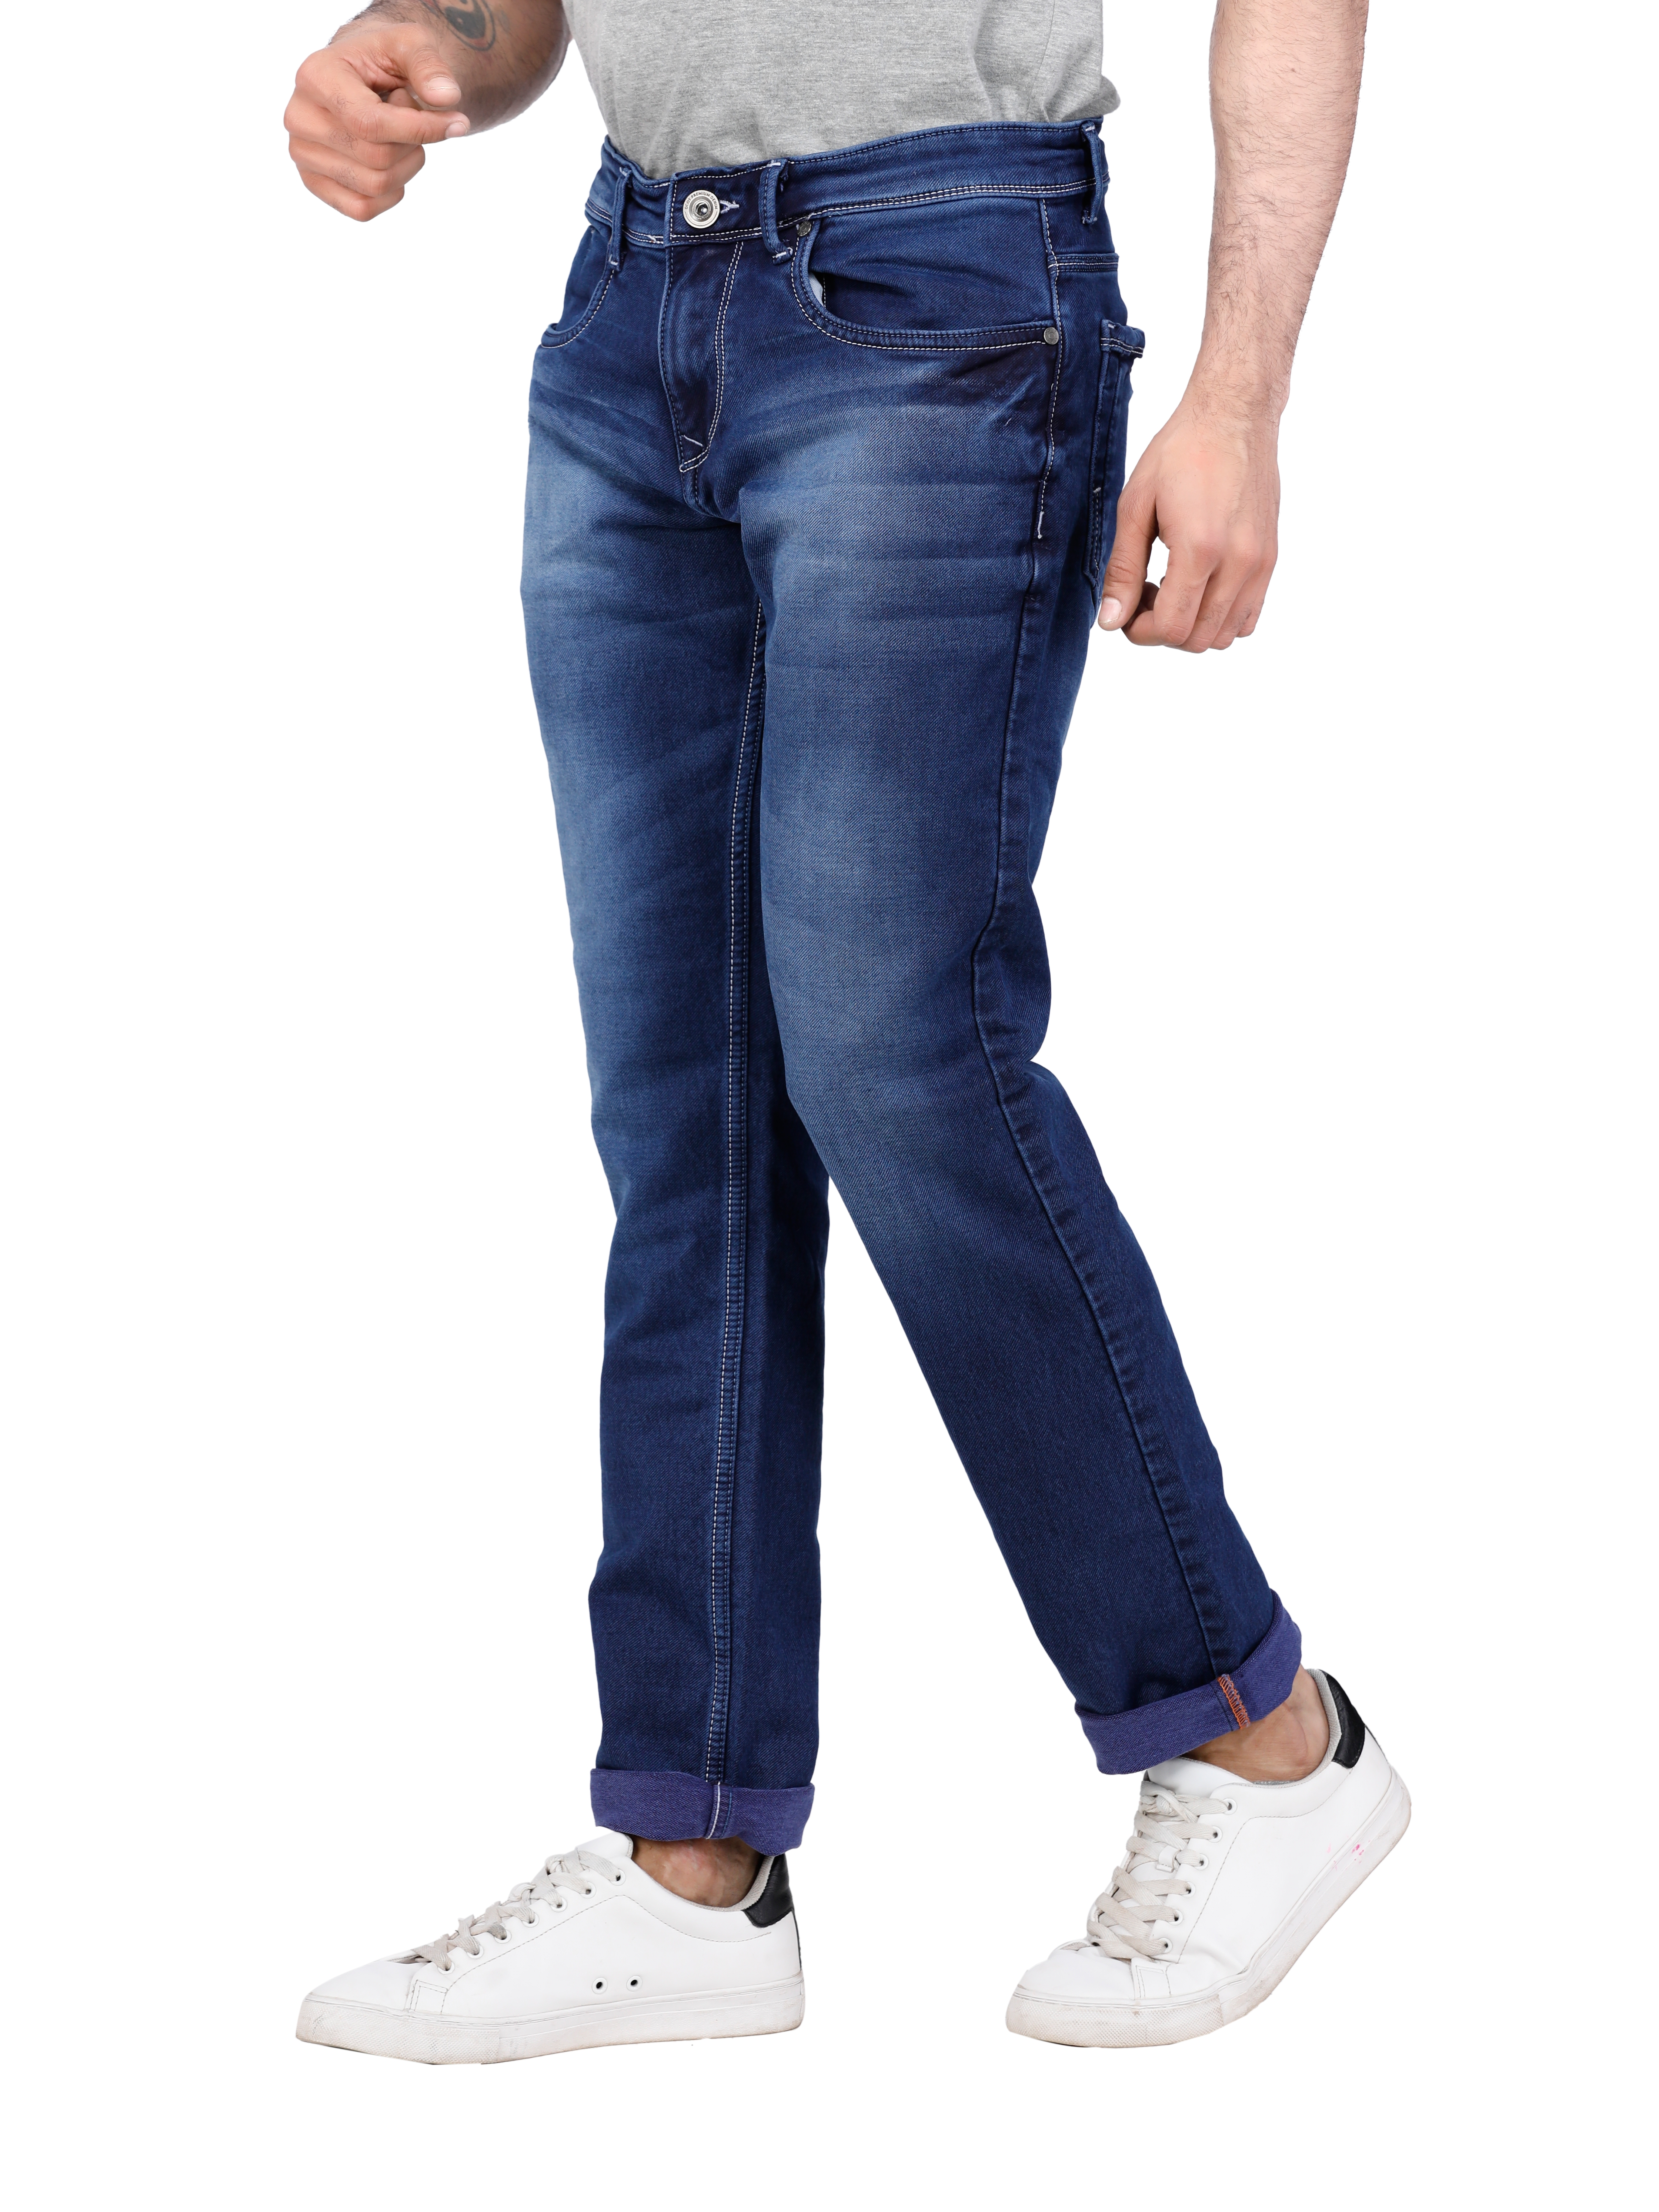 D'cot by Donear | D'cot by Donear Men Blue Cotton Slim Knitted Jeans 2